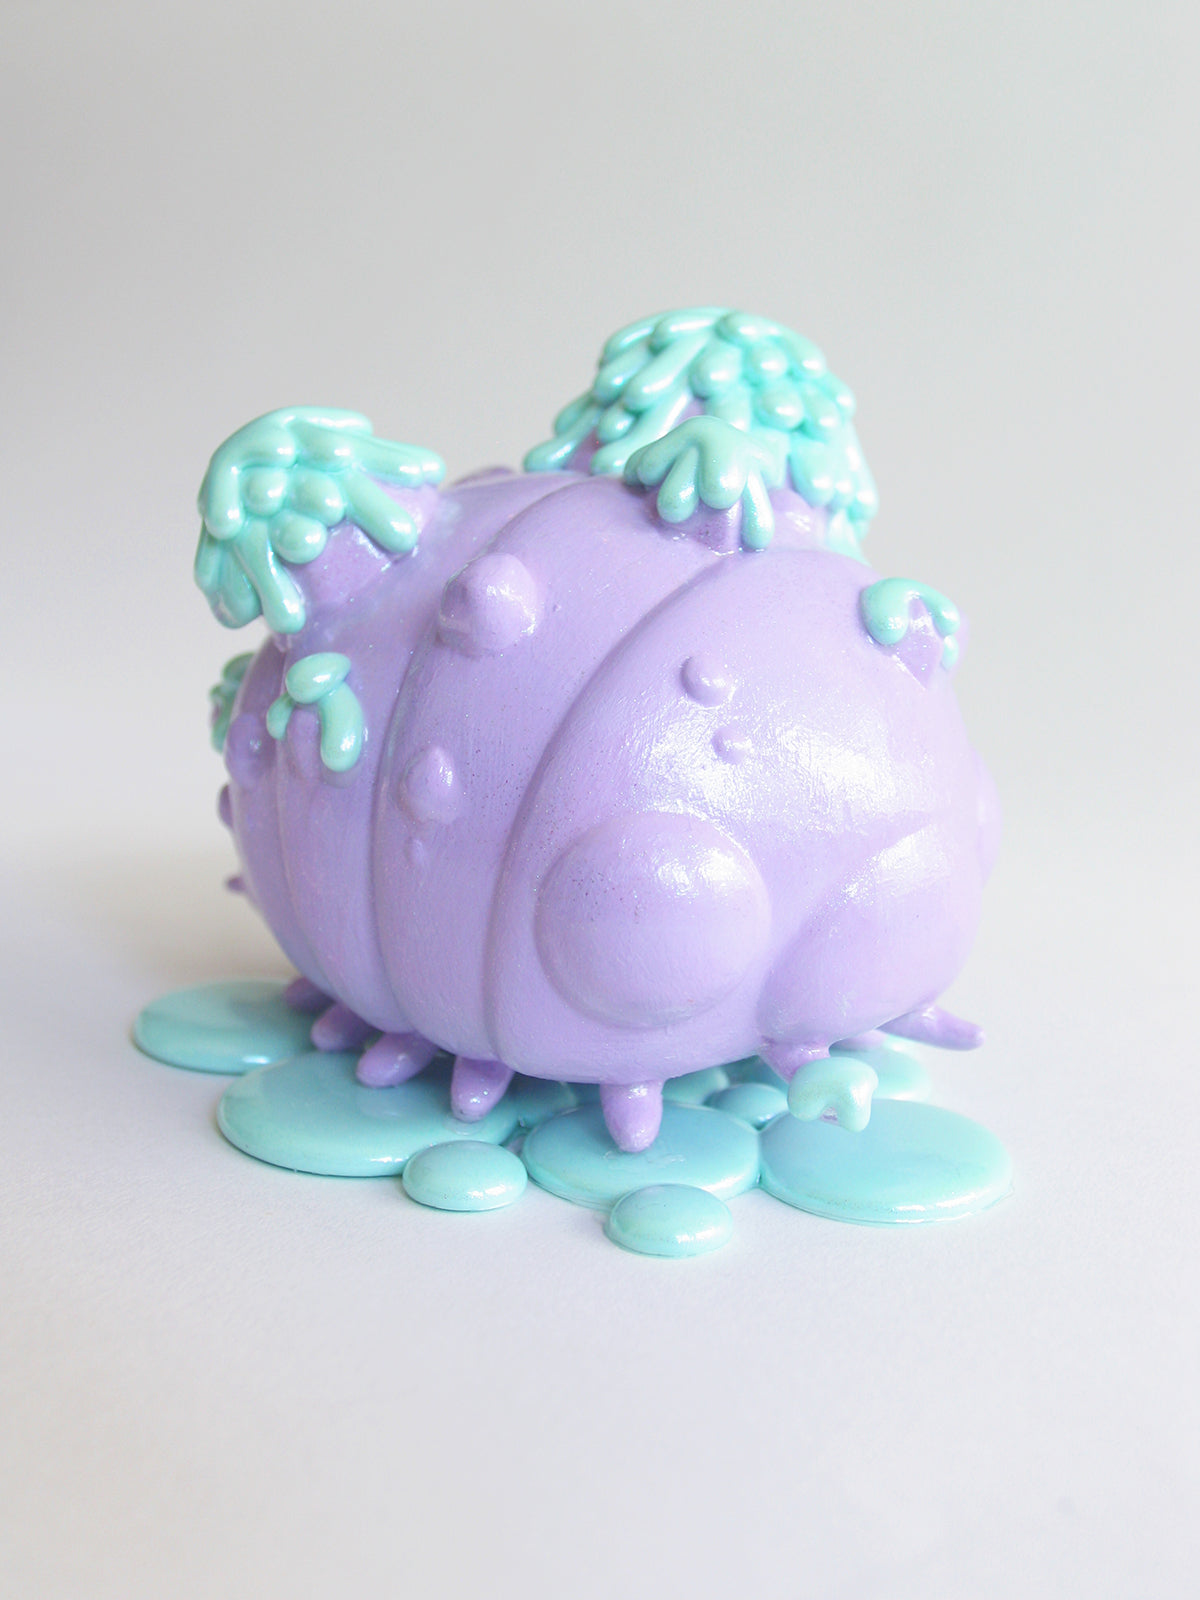 Animal figure toy, Melty World - Melty Gempod by Brigitte Coovert, featuring slime and liquid elements.